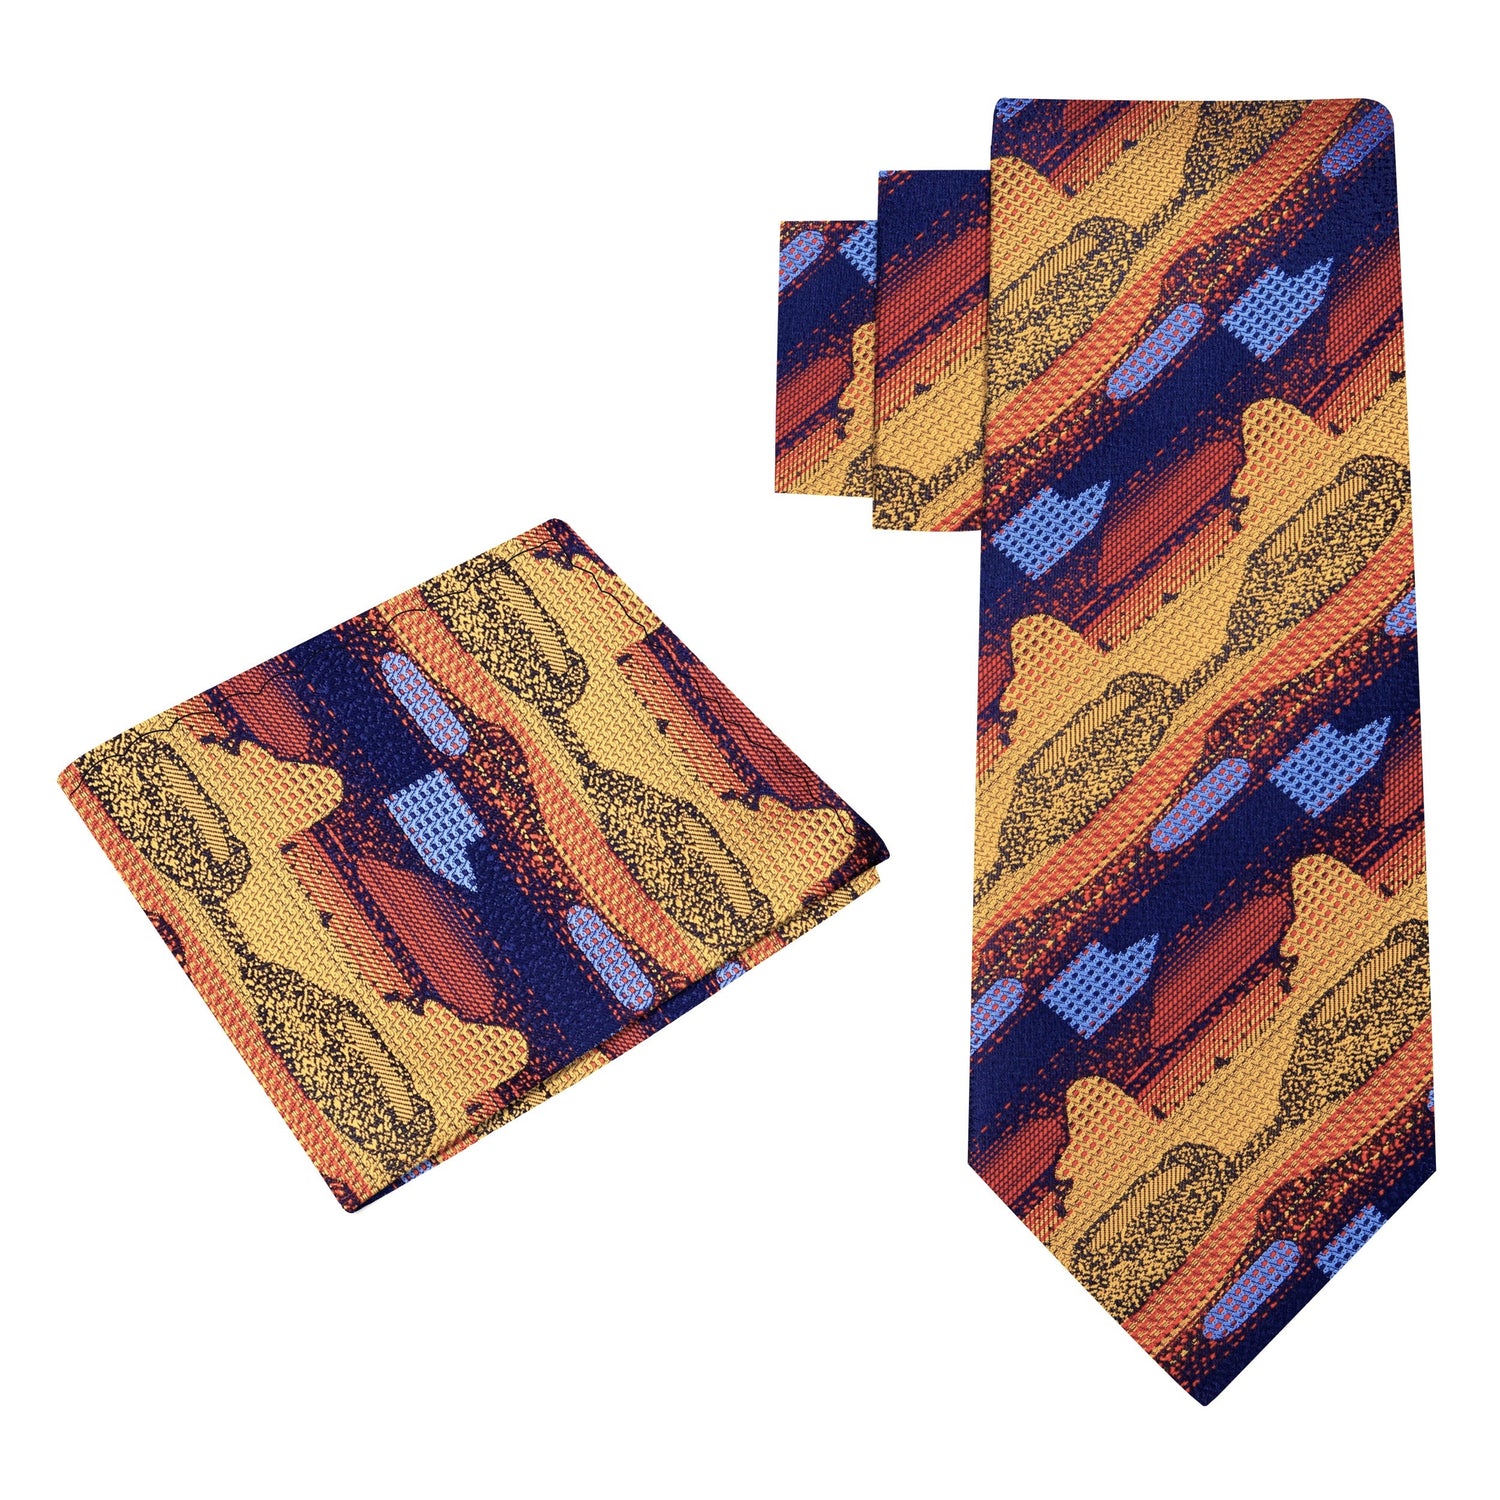 Alt View: Orange, Blue Abstract Tie and Matching Square